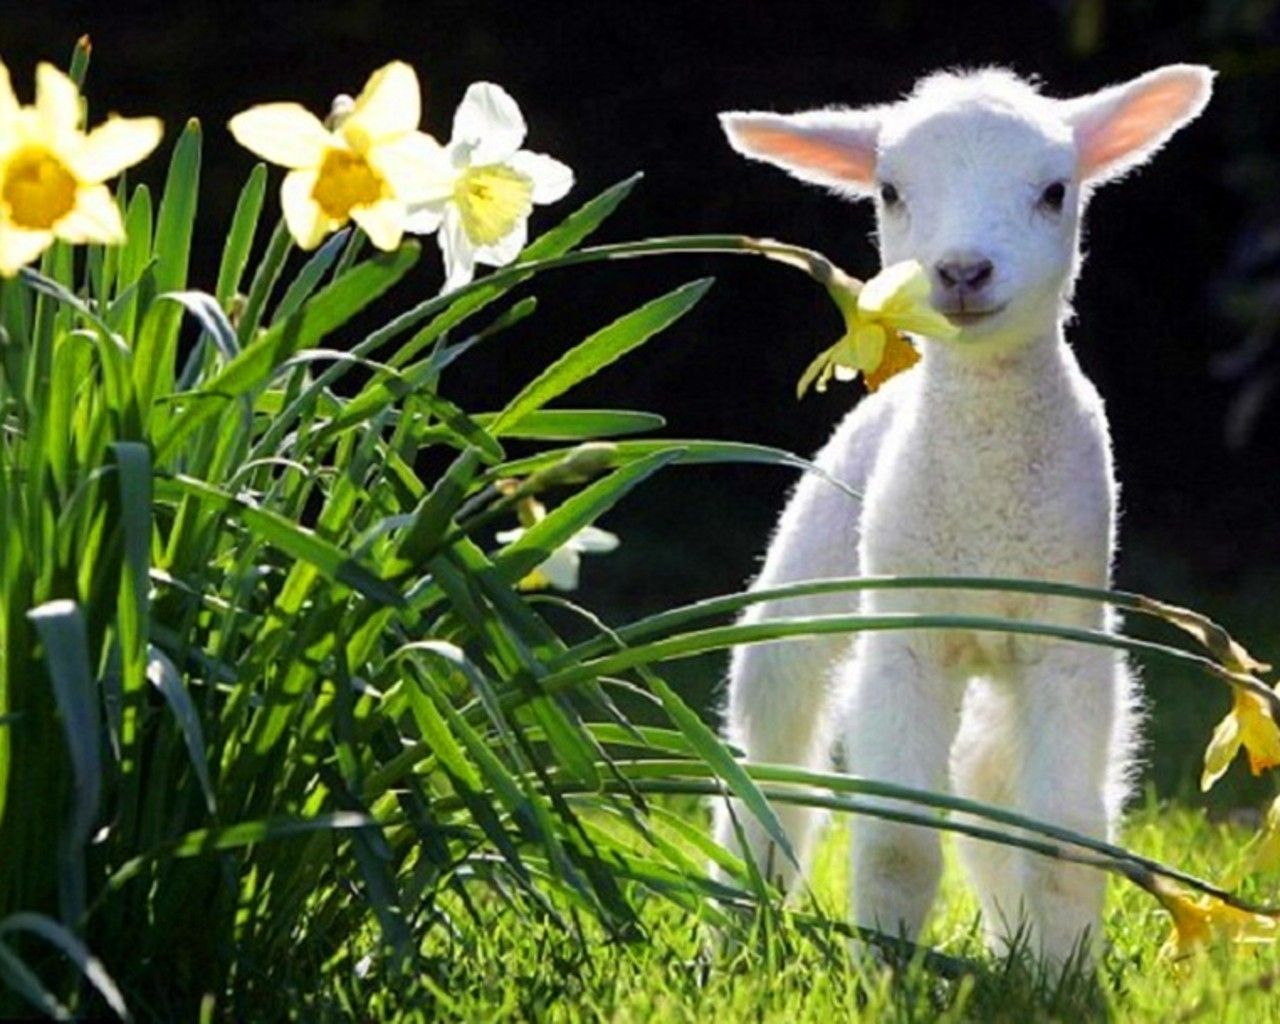 Download Wallpaper, Download flowers animals grass spring lamb daffodils lambs white flowers baby animals 1280x1024 wall. Cute animals, Animals, Animal picture